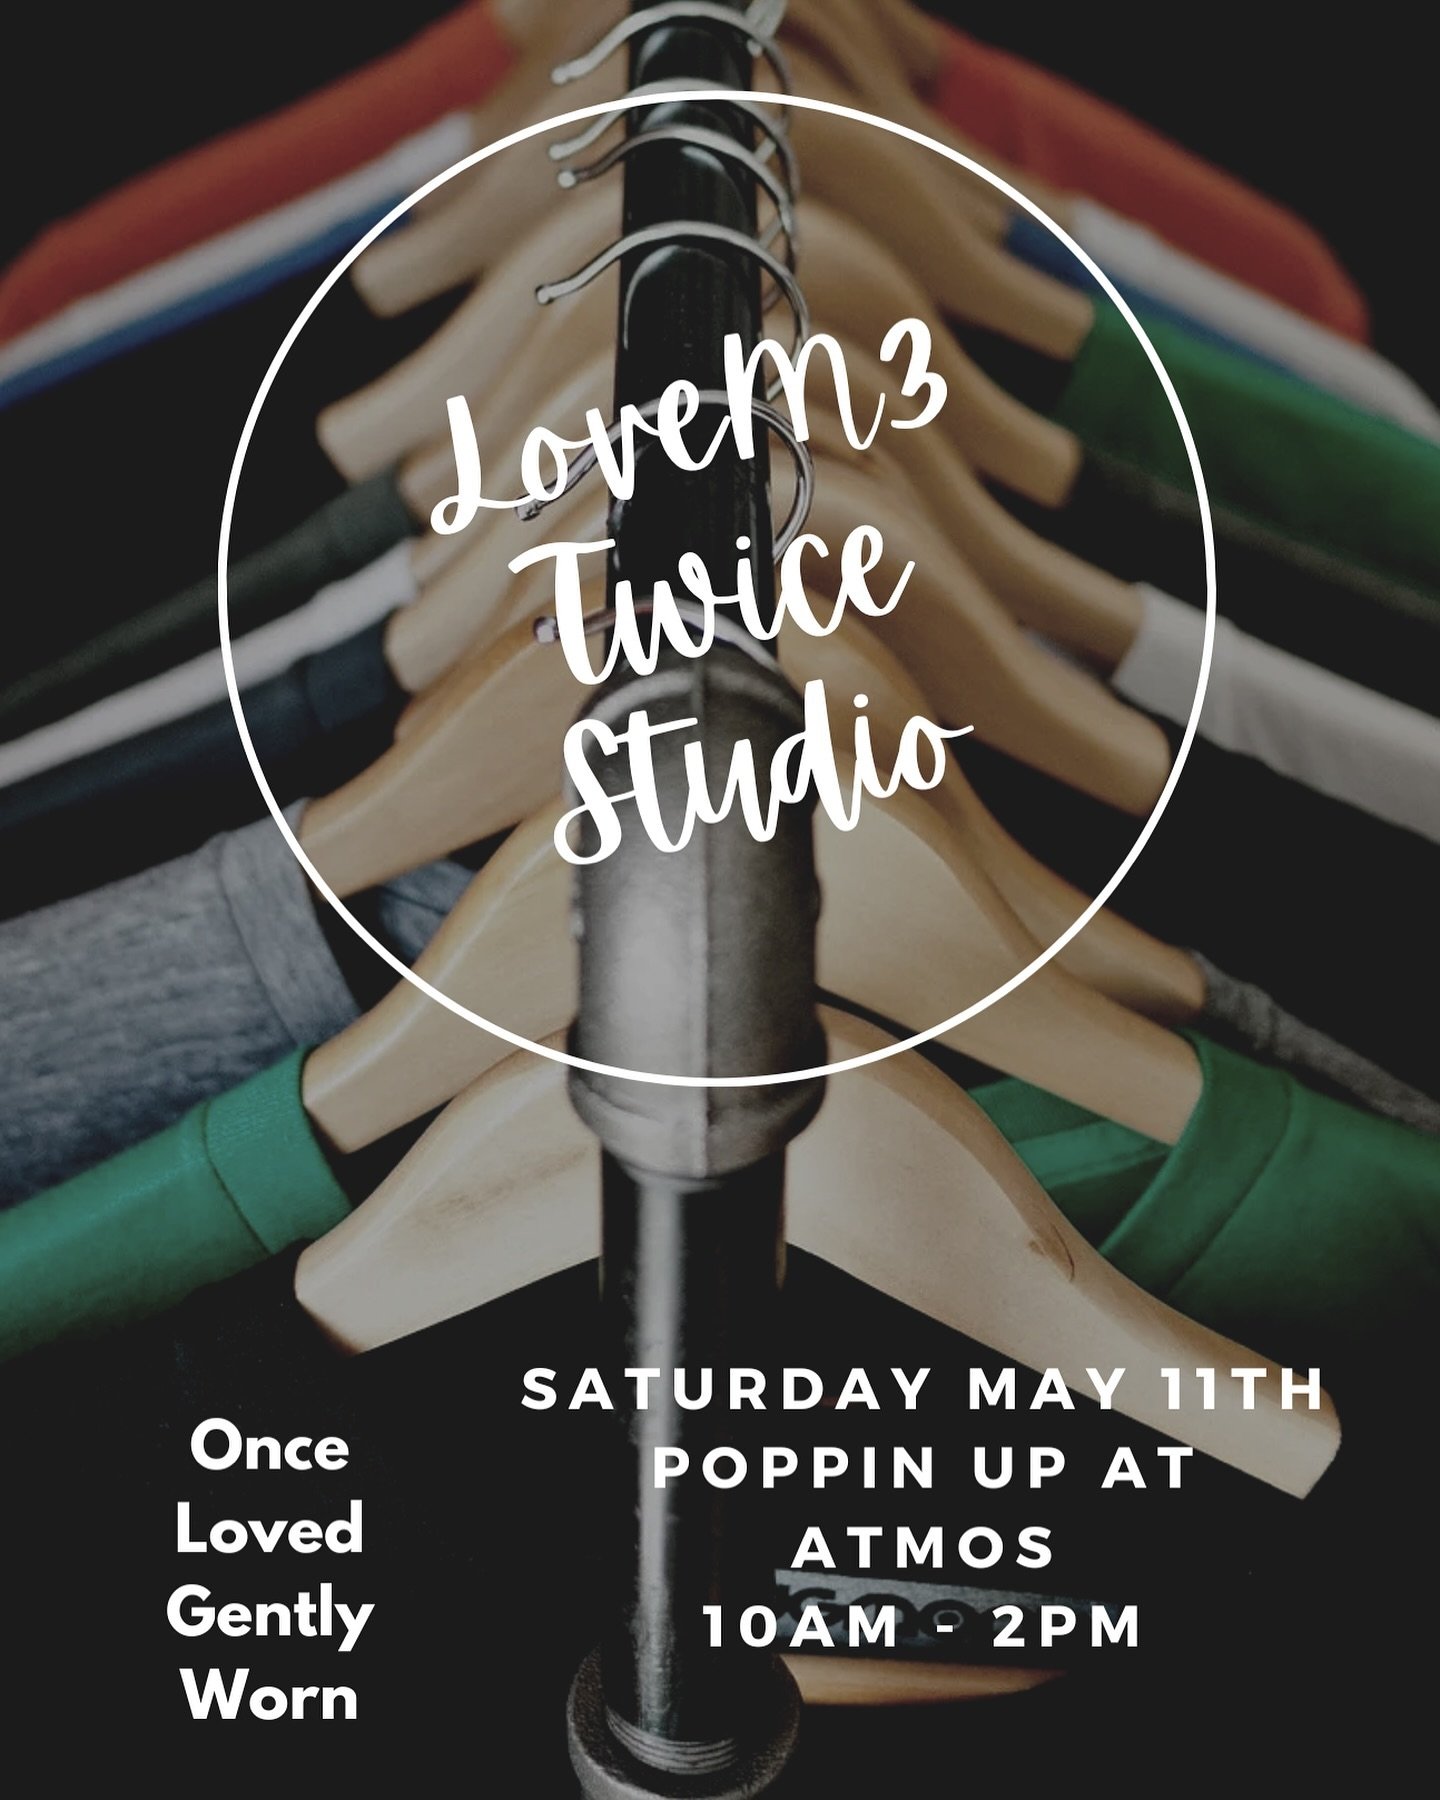 Love M3 Twice - is Poppin Up at ATMOS 
Saturday May 11th 10am - 2pm 
:
50% of sales are donated to the studio 
To support free classes for those that need it most and can&rsquo;t afford it. 
:
We will continue to have Love M3 Twice  as a partner . &h